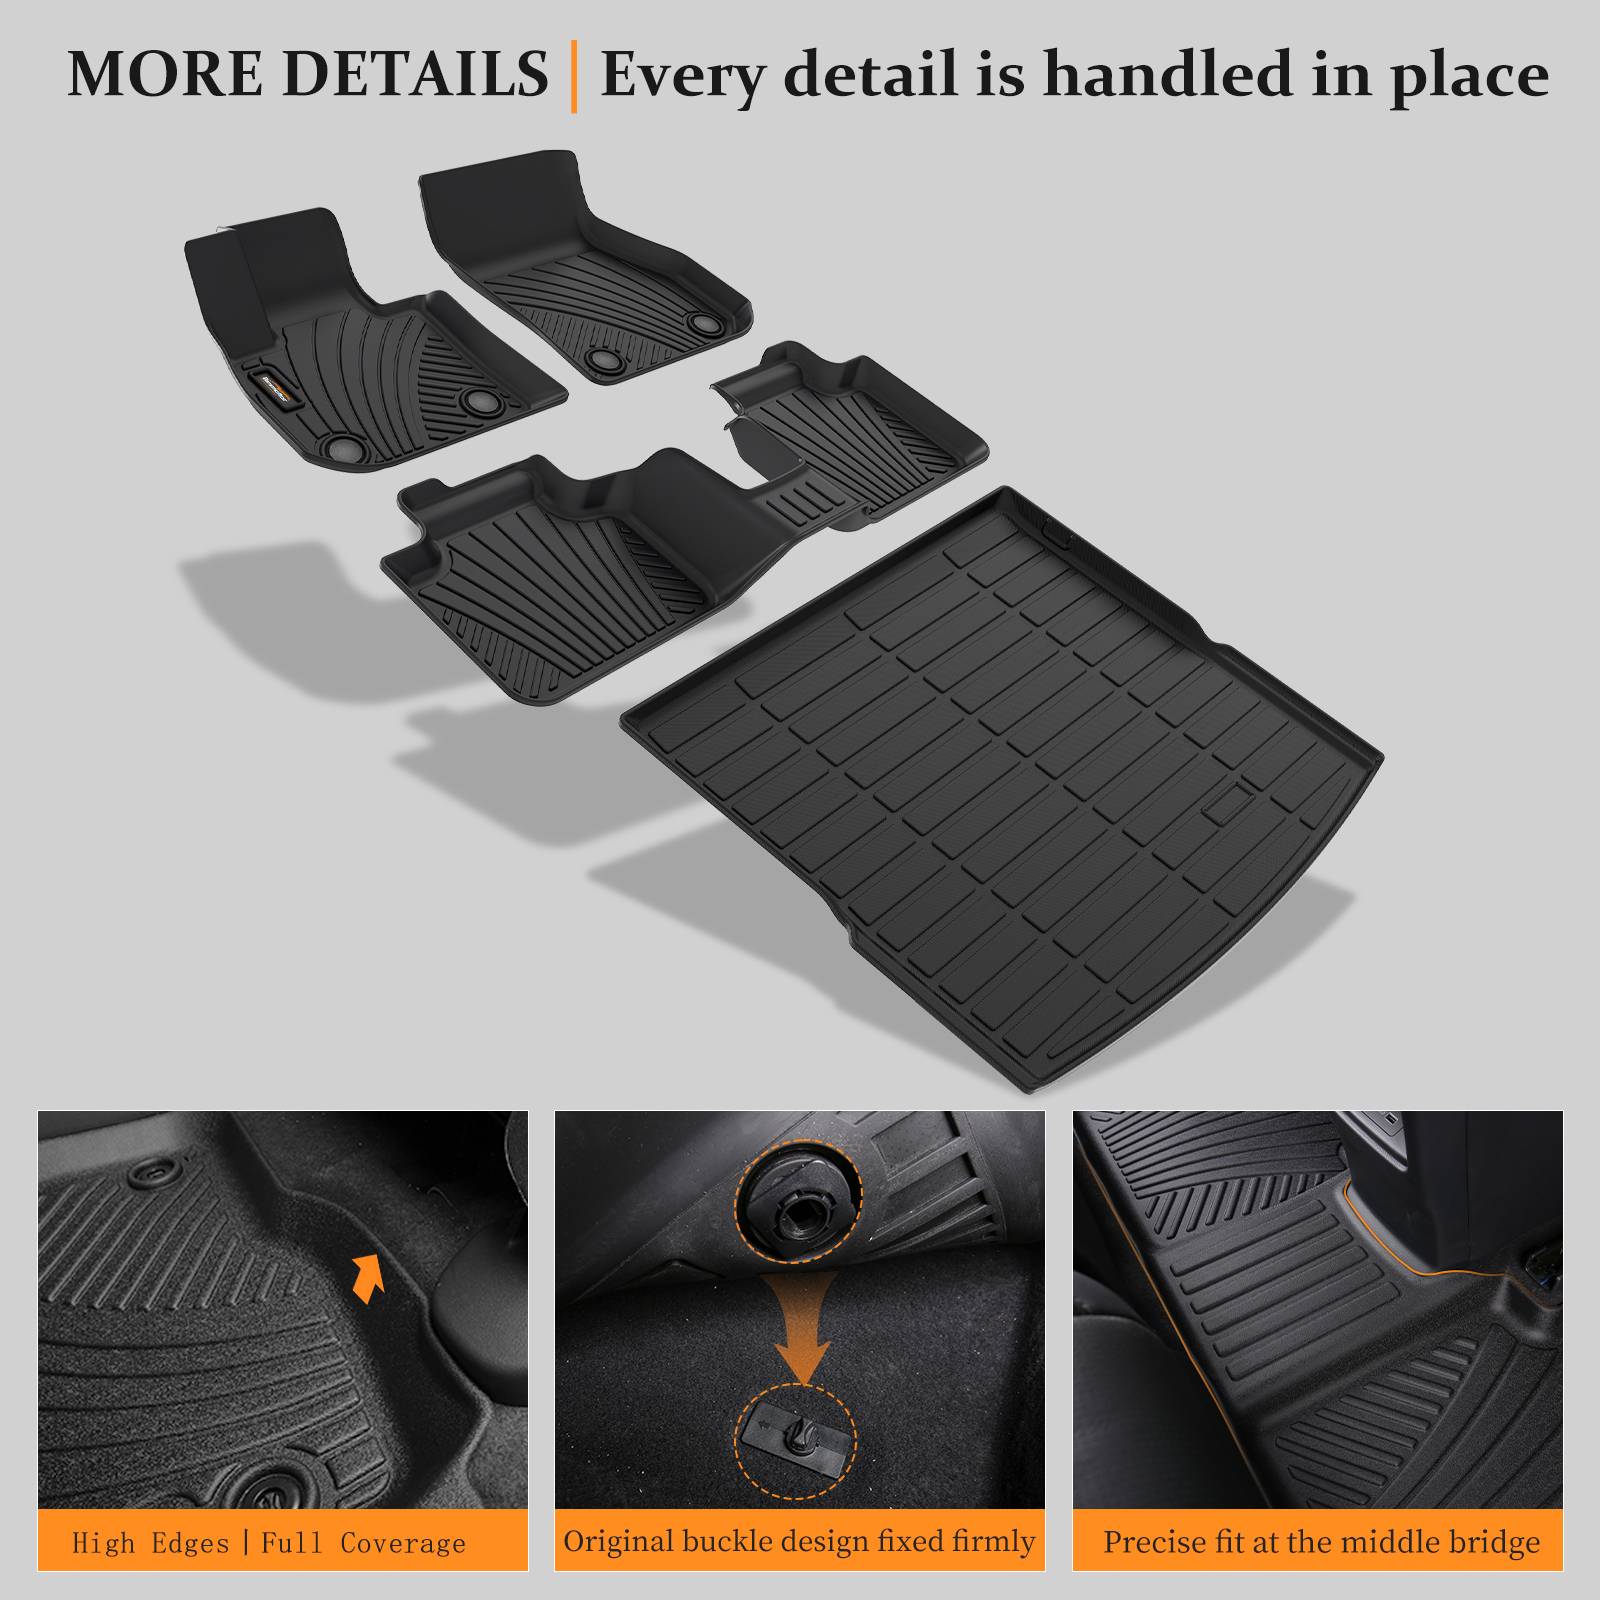 Binmotor-Floor Mats Fit for Hyundai Kona EV (Electric Models Only) All Weather Guard Car Mats Front & Rear Heavy Duty TPE Automotive Floor Liners Full Set Accessories Black（compatible year 2019-2023）